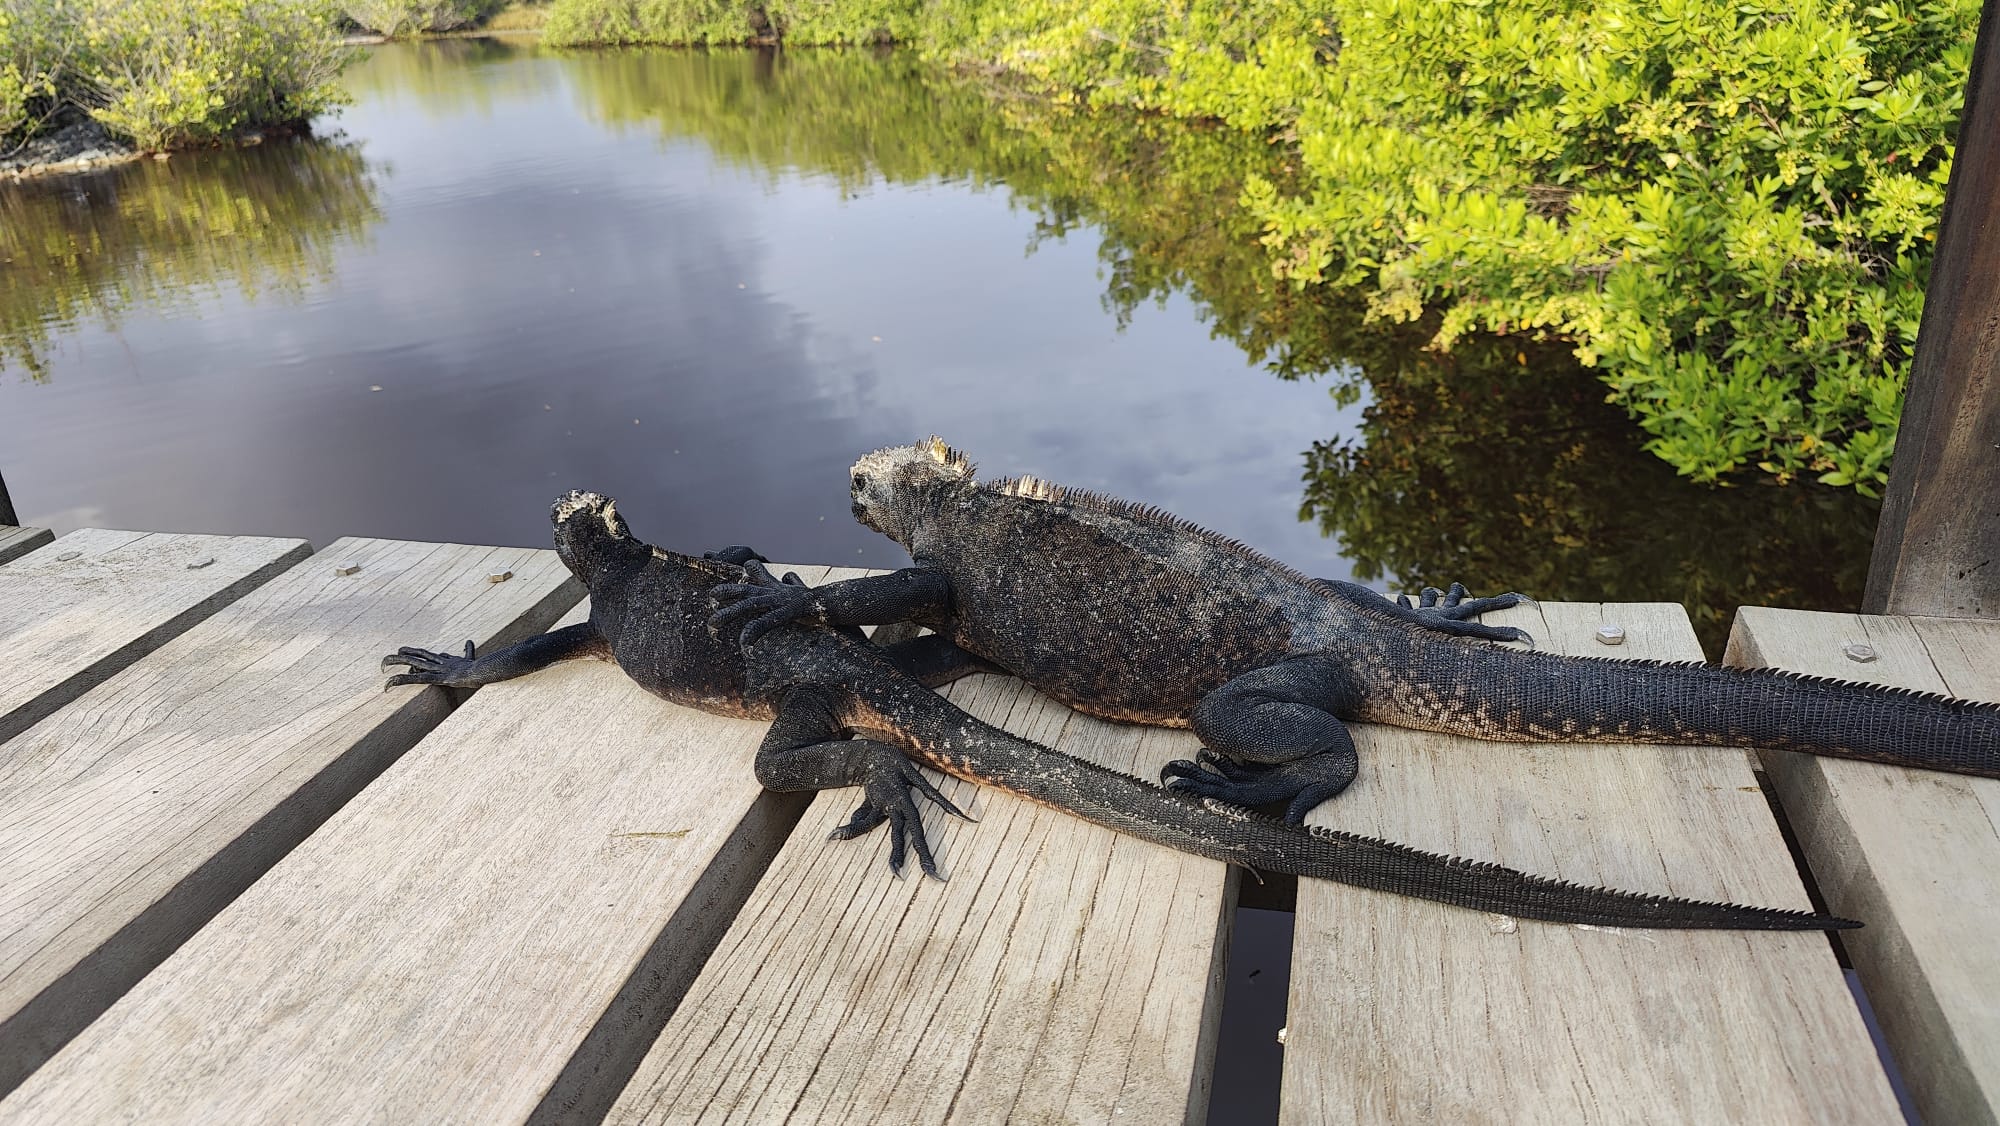 Pictured are two sea lizards on a wooden walkway putting their arms on each other's backs. Behind them is a pond and greenery.